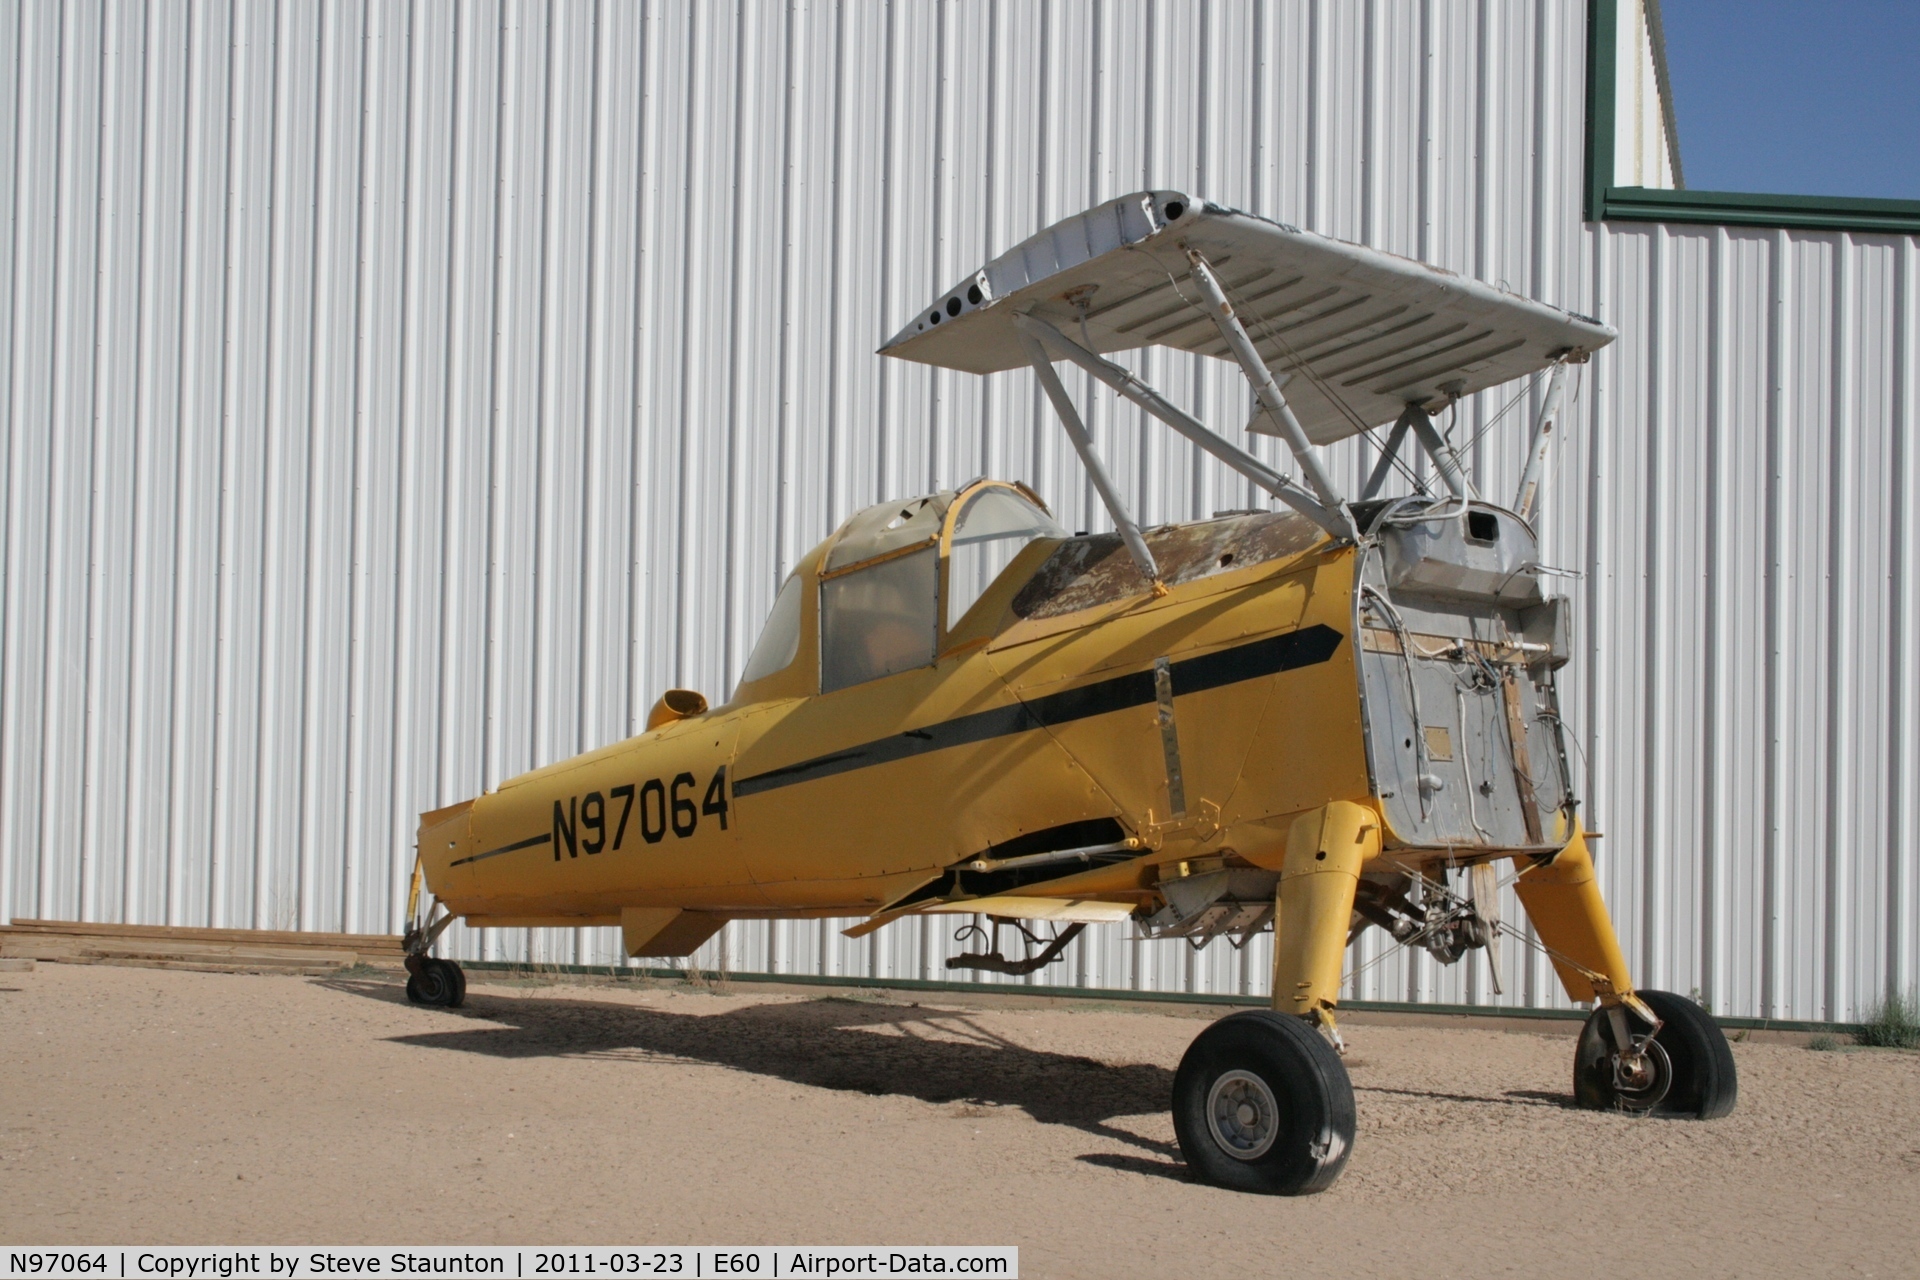 N97064, MurrayAir MA-1 C/N SH1920, Taken at Eloy Airport, in March 2011 whilst on an Aeroprint Aviation tour